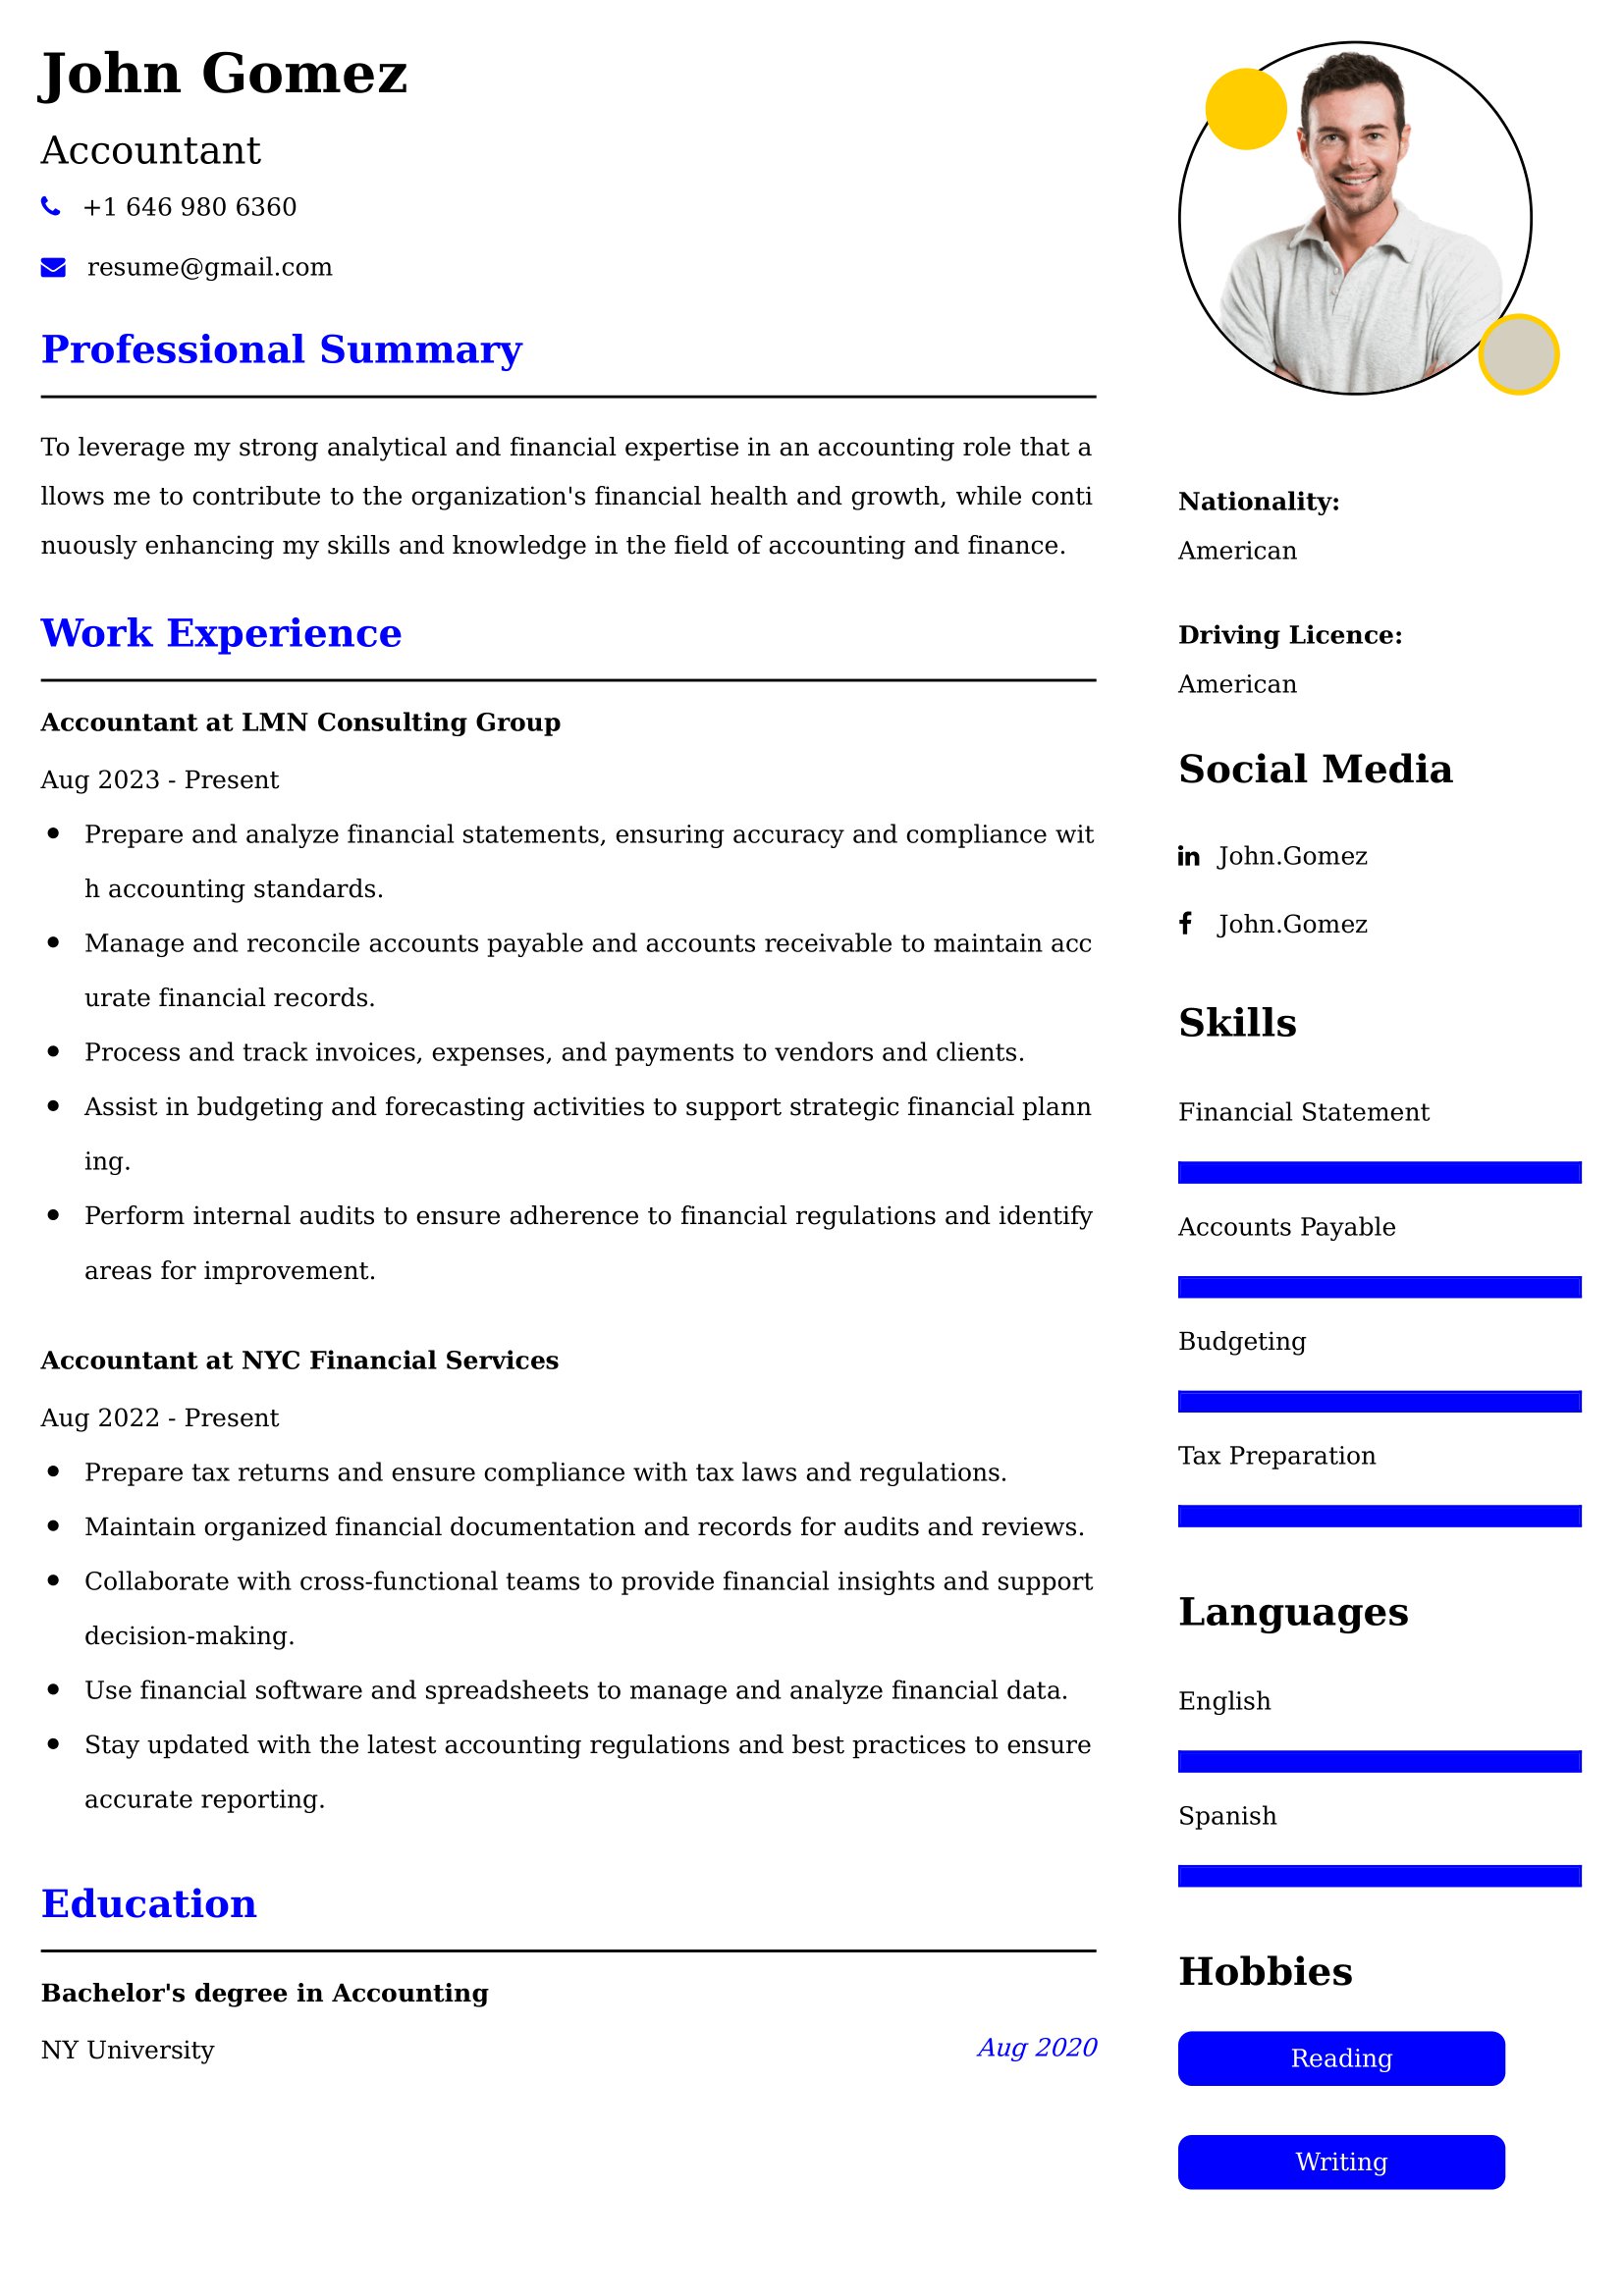 Professional Accounting CV Examples | 75+ ATS-Optimized Samples and Guide